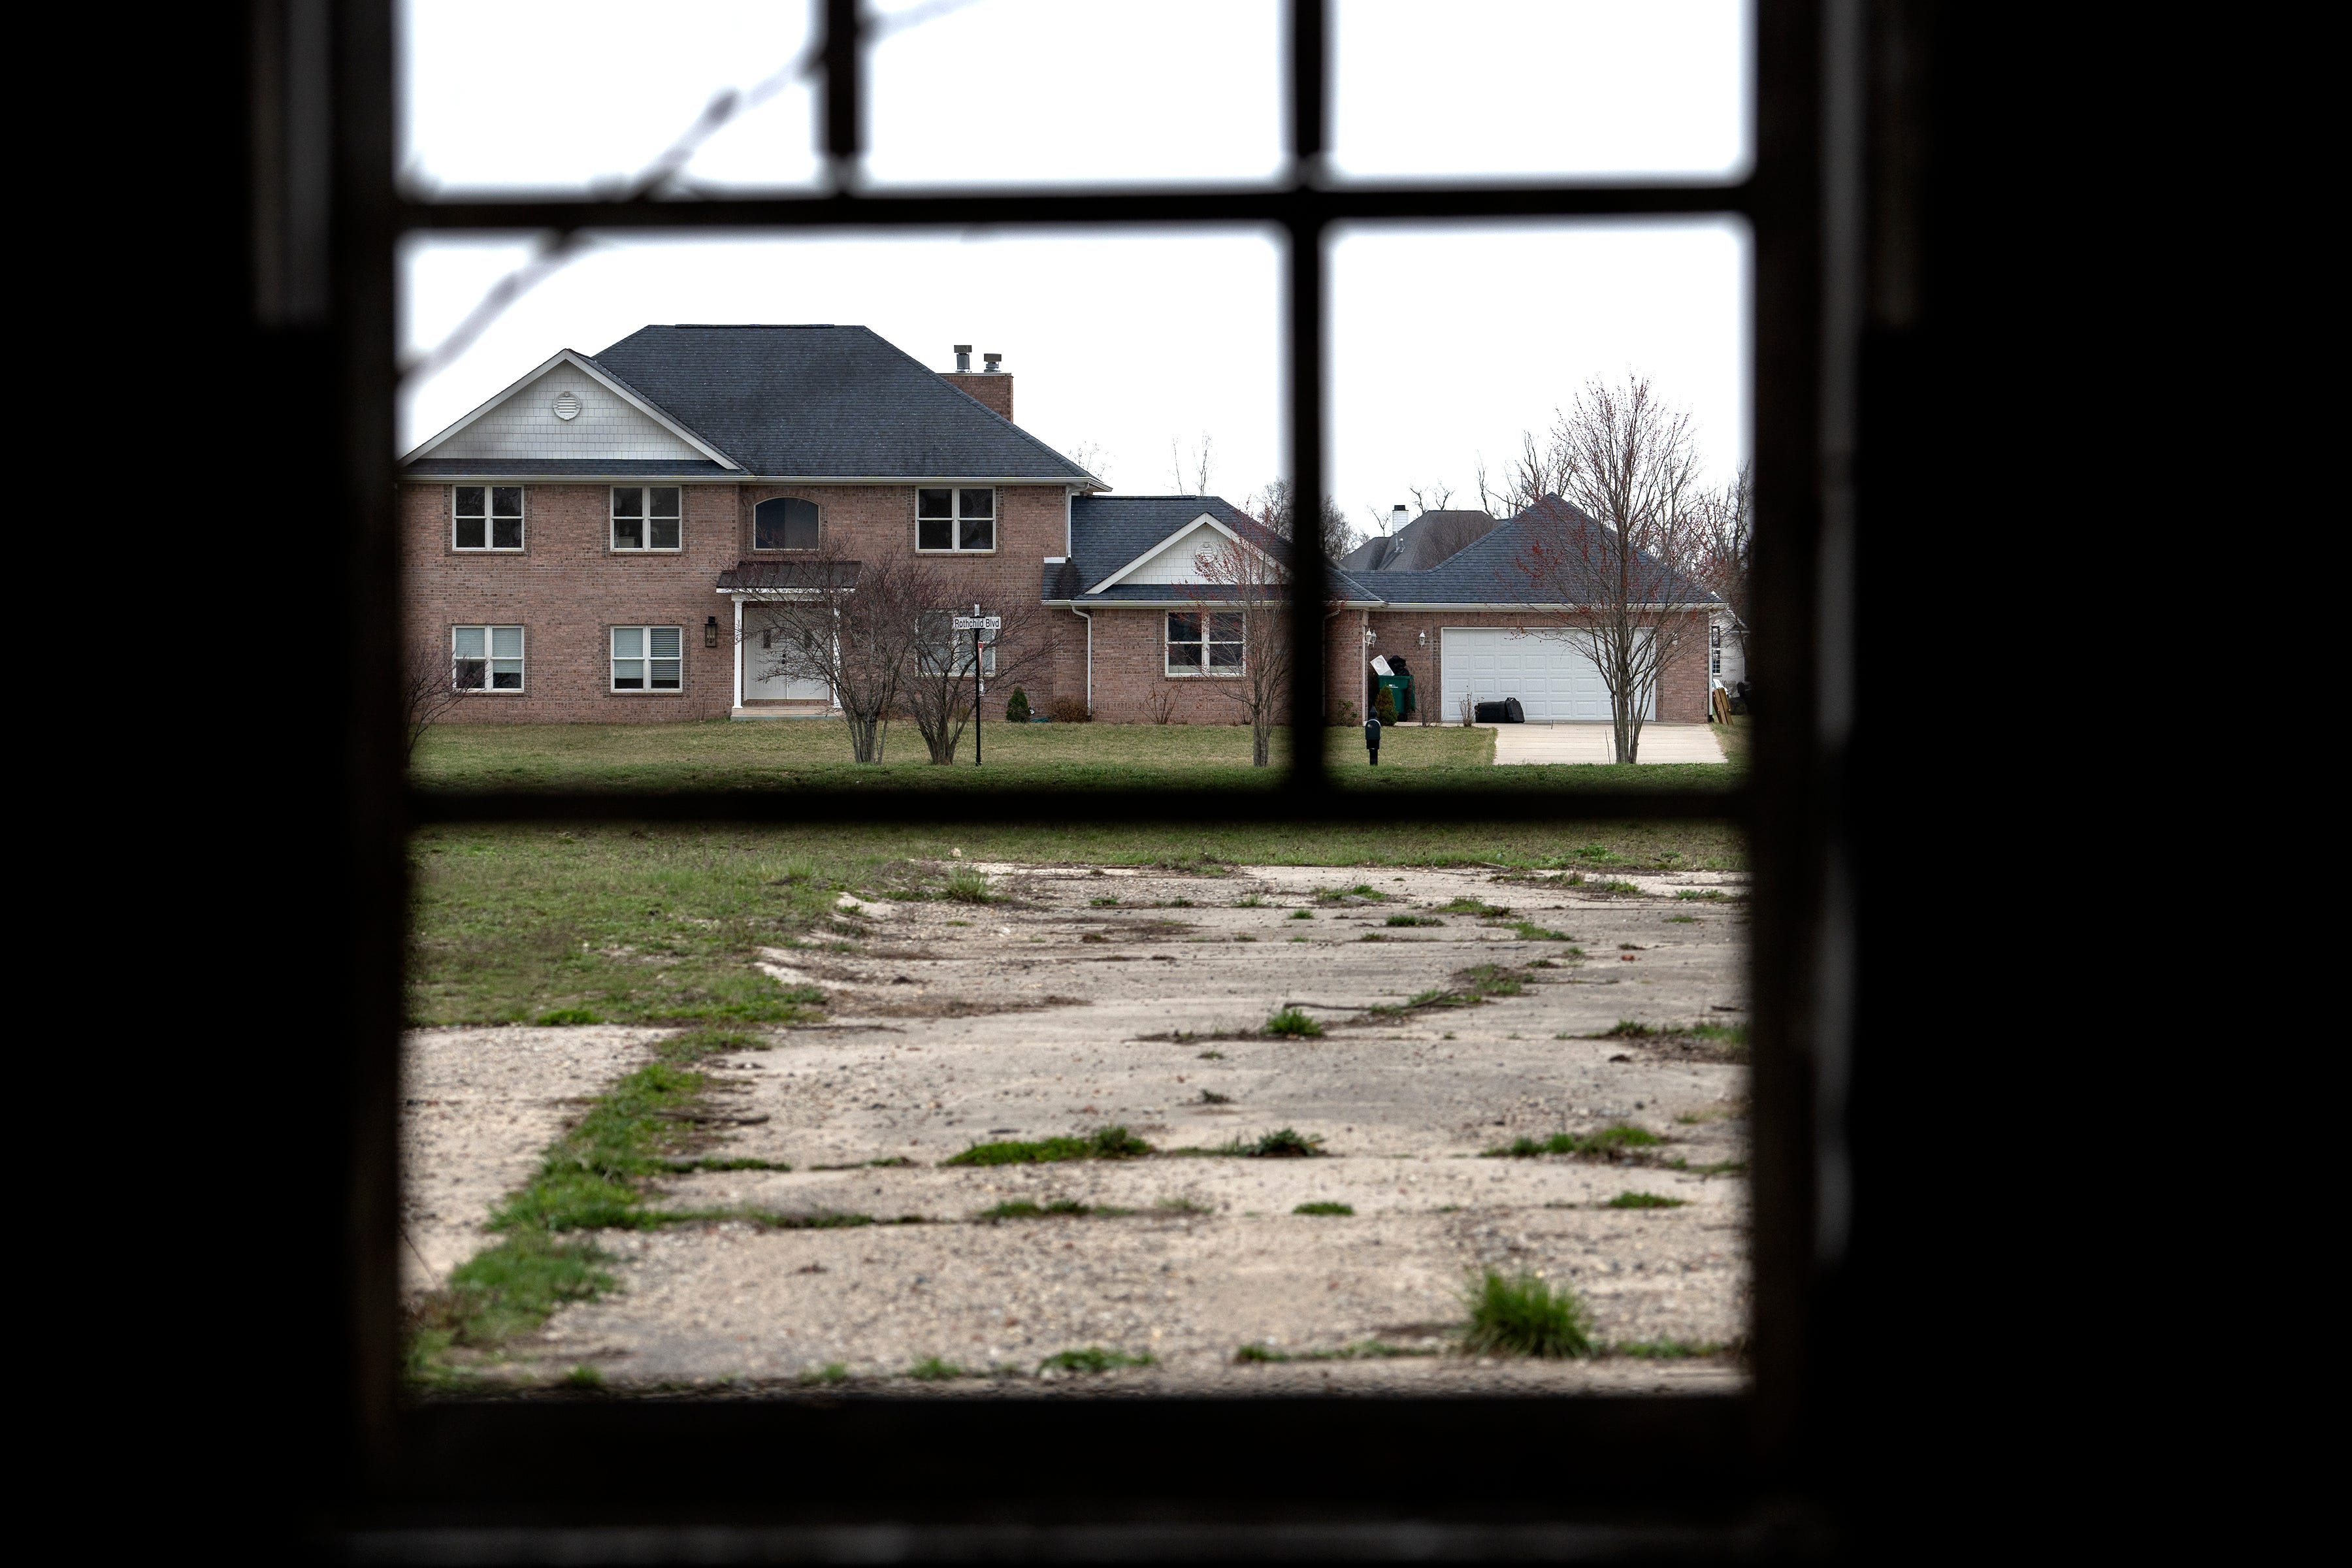 Buildings from an old farm are empty and deteriorating at 7802 Marsh Rd., Monday, March 18, 2024 in the Traders Point neighborhood. The buildings are slated for demolition to ready the property for houses to be built. A neighborhood of houses can be seen through a barn's window.